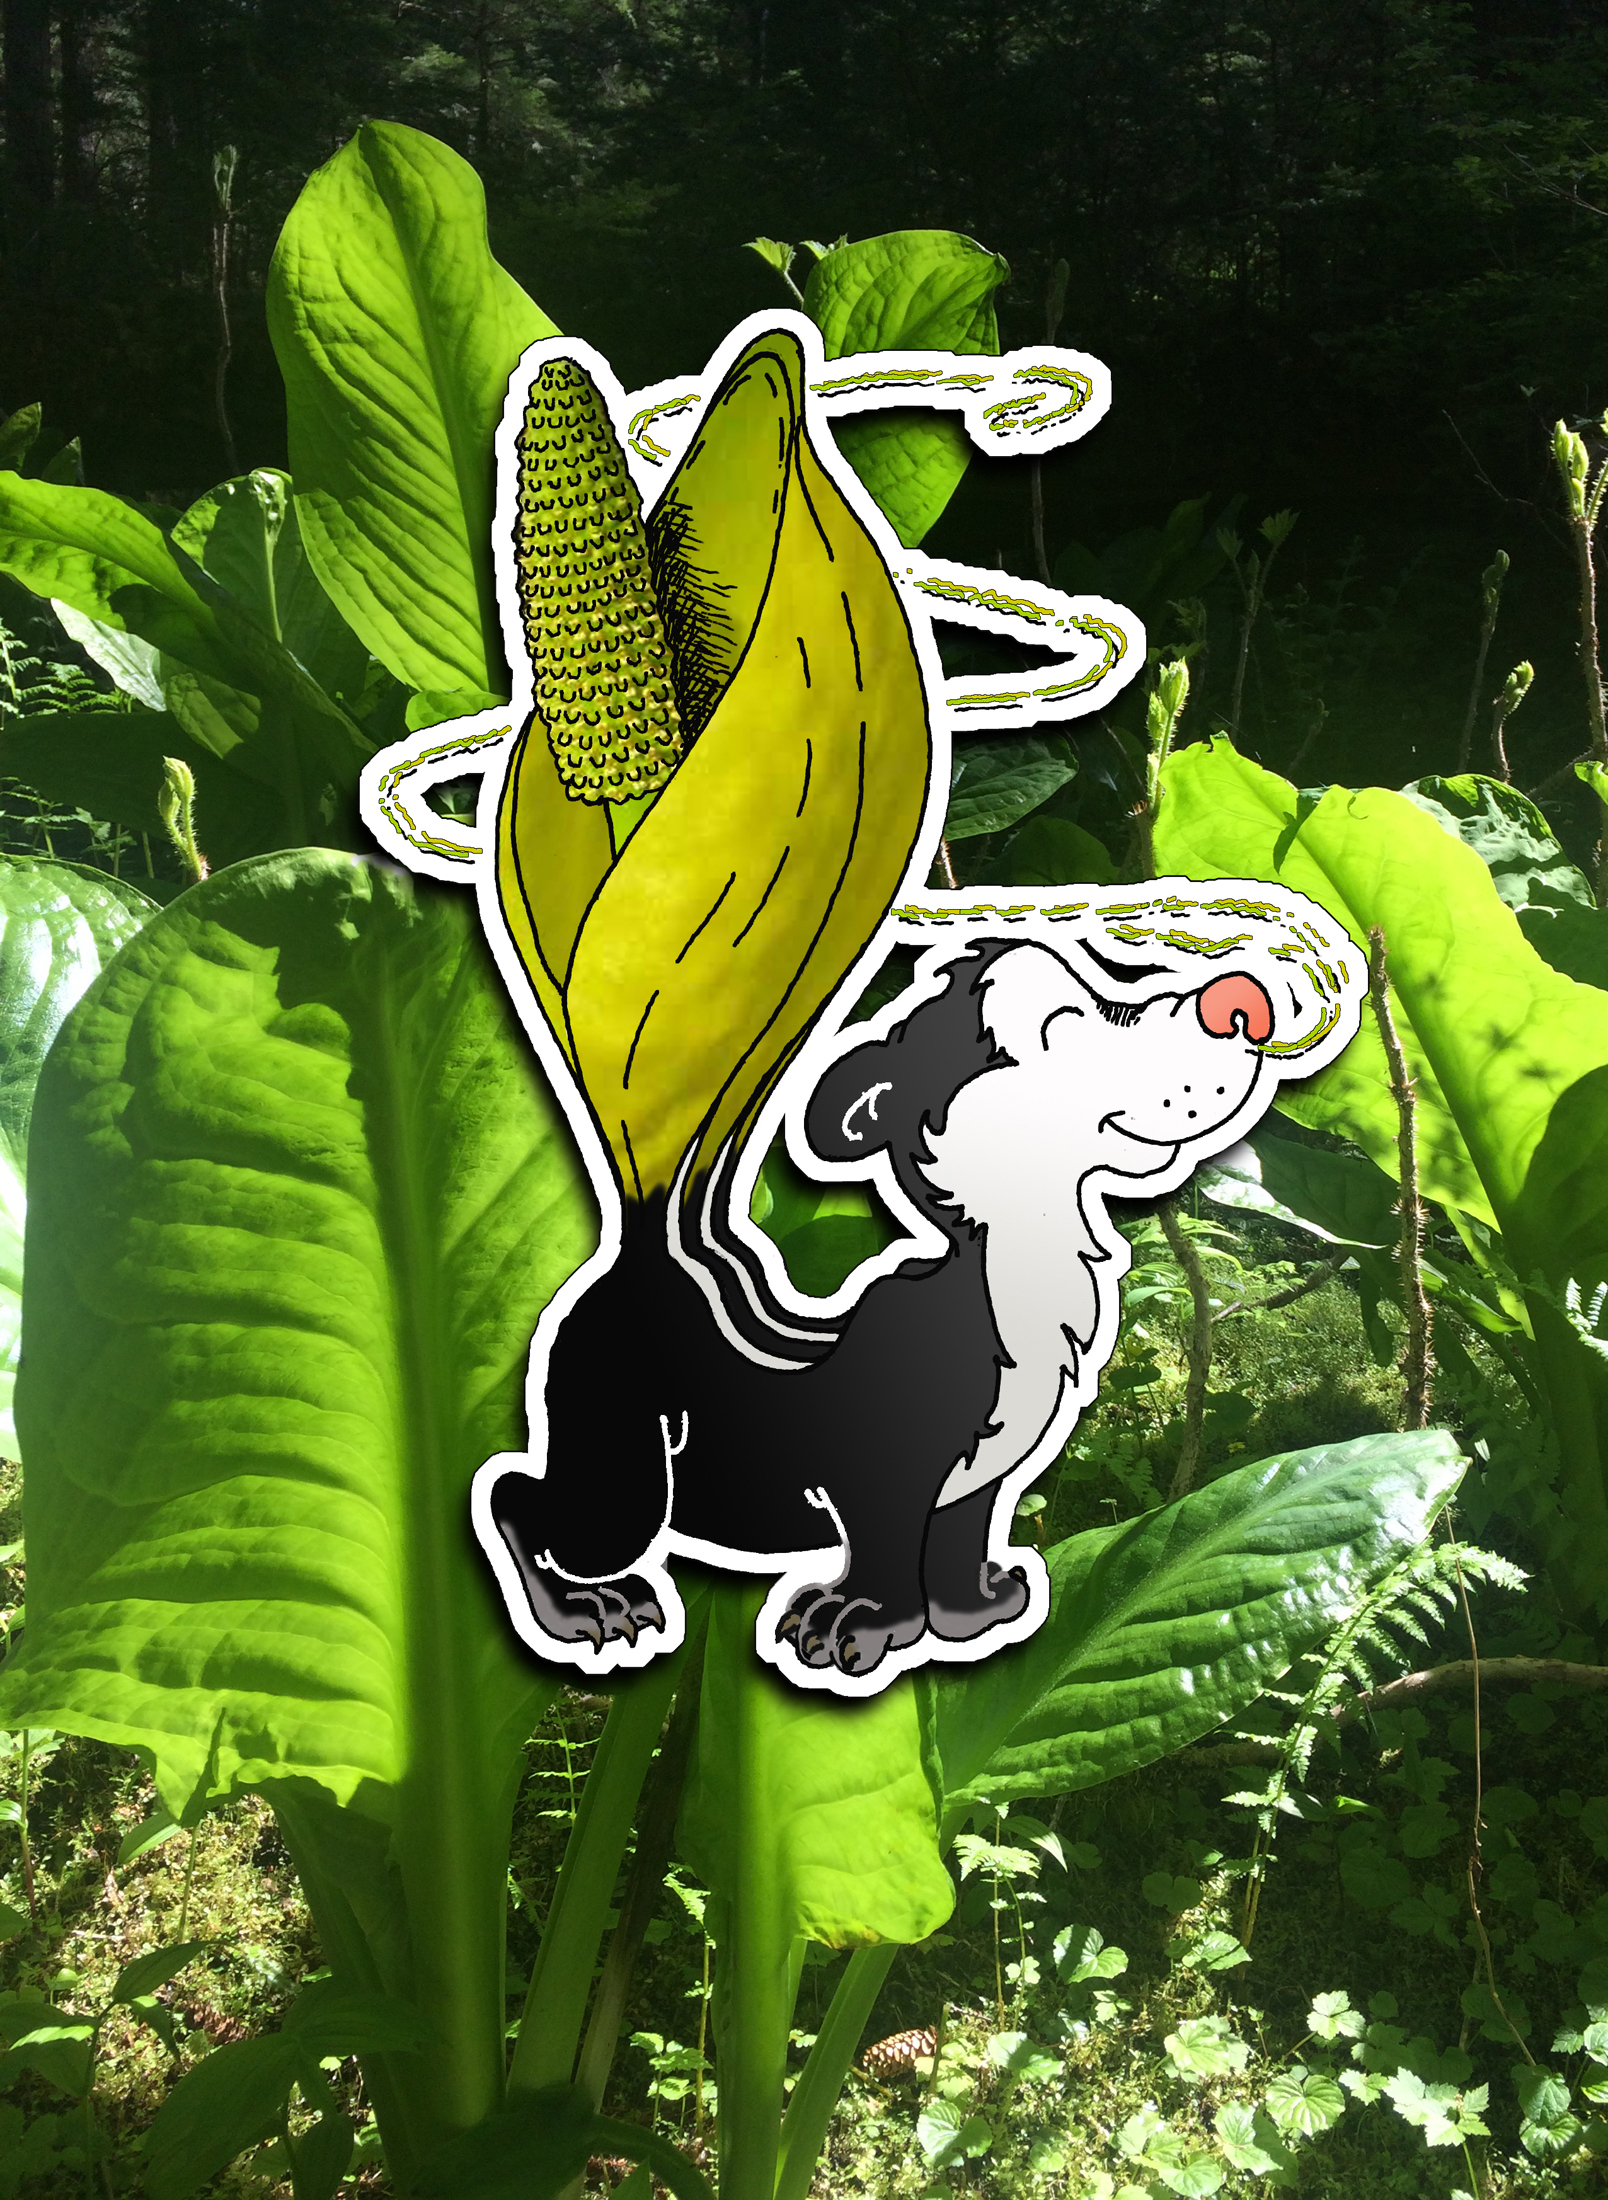 Decaffeinated Designs’ skunk cabbage sticker, seen with its inspiration. Photo by James Kelly.